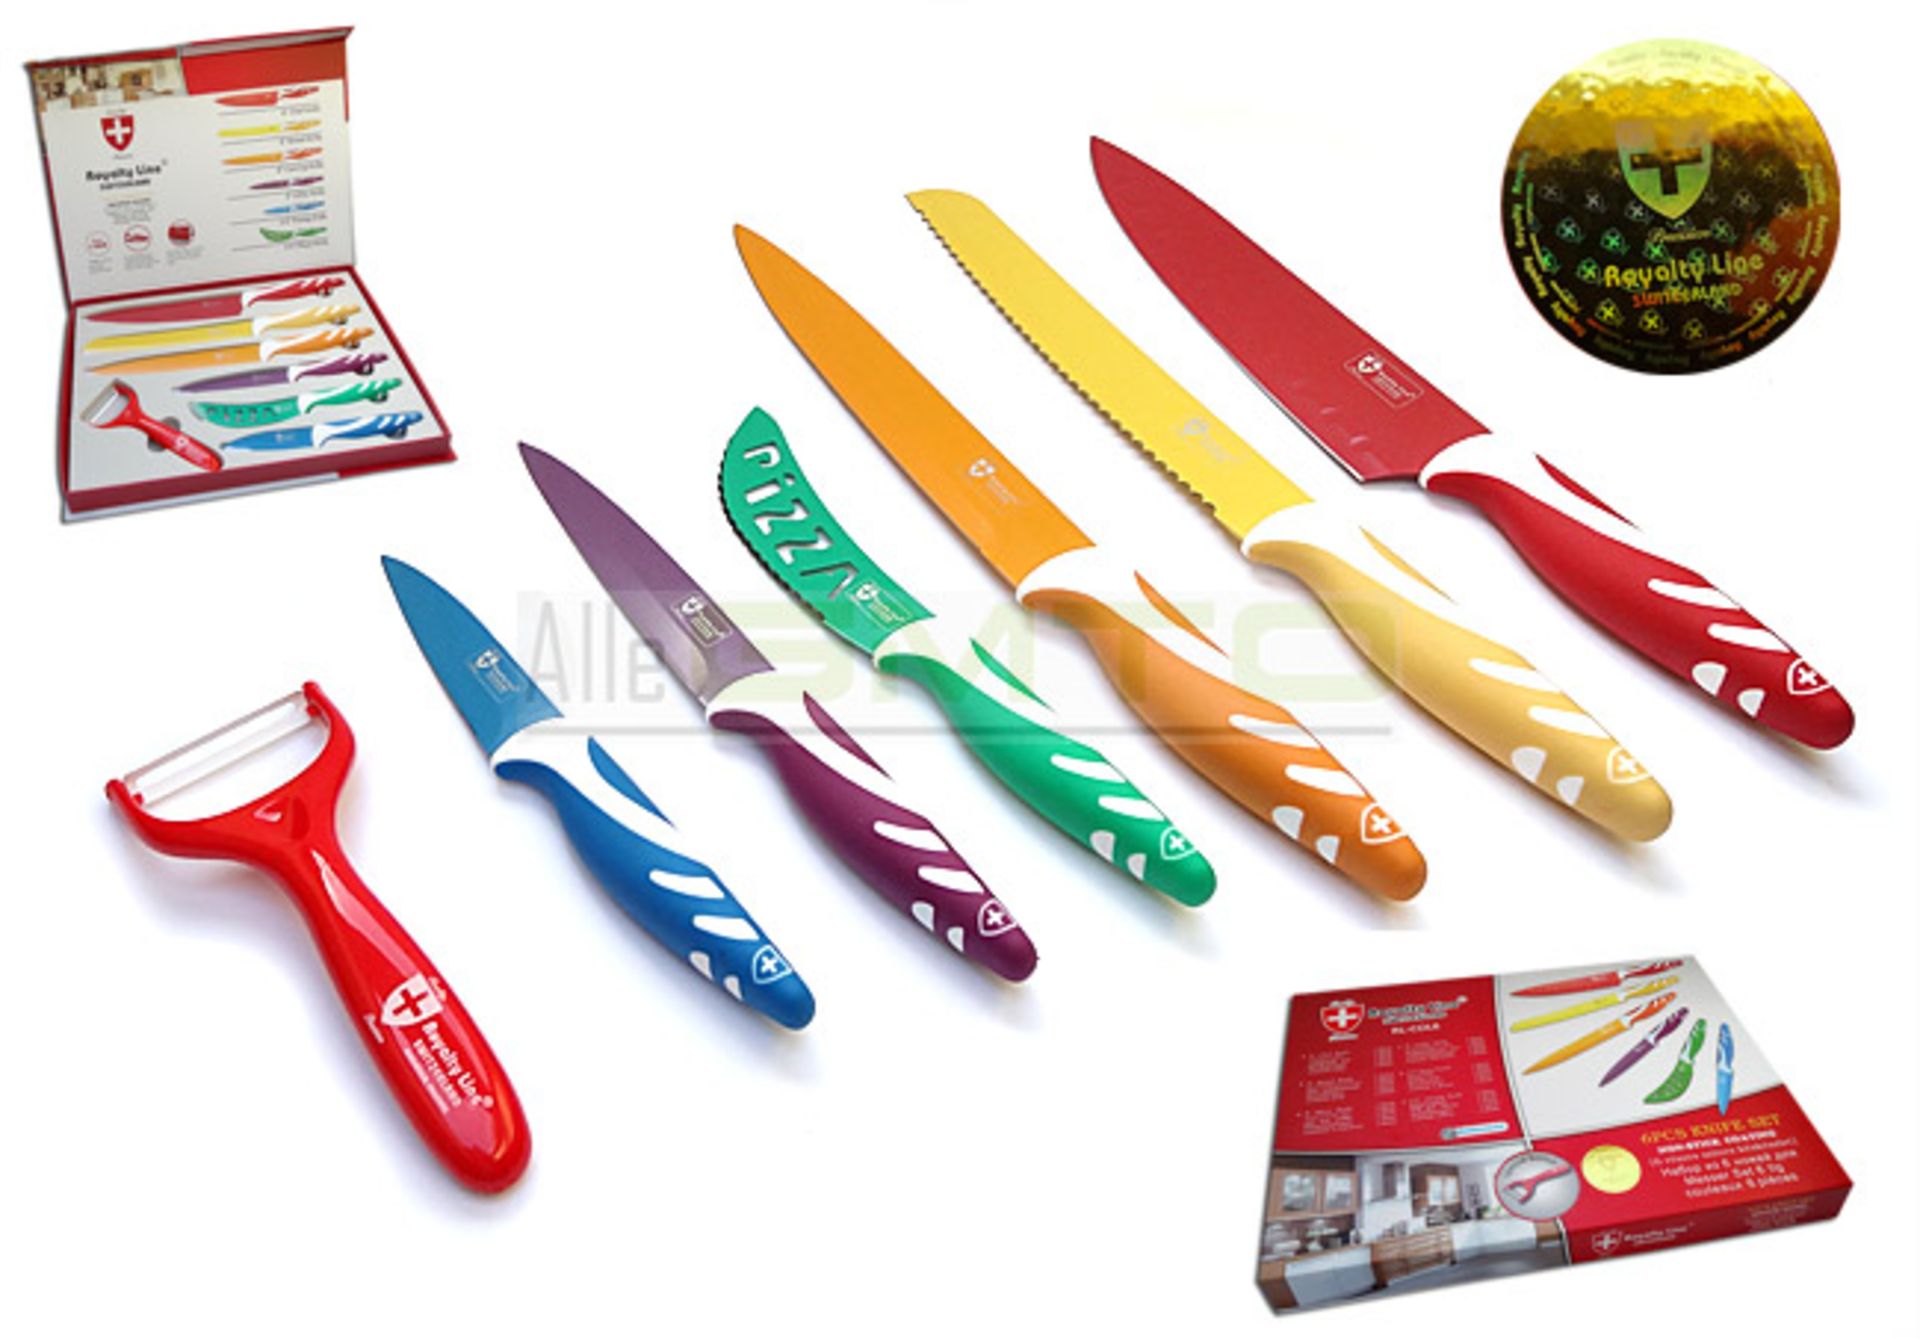 V  Grade A 7 Piece Non-Stick Multi Coloured Knife Set RRP99.00 Euros (Handle pattern varies from - Image 2 of 2